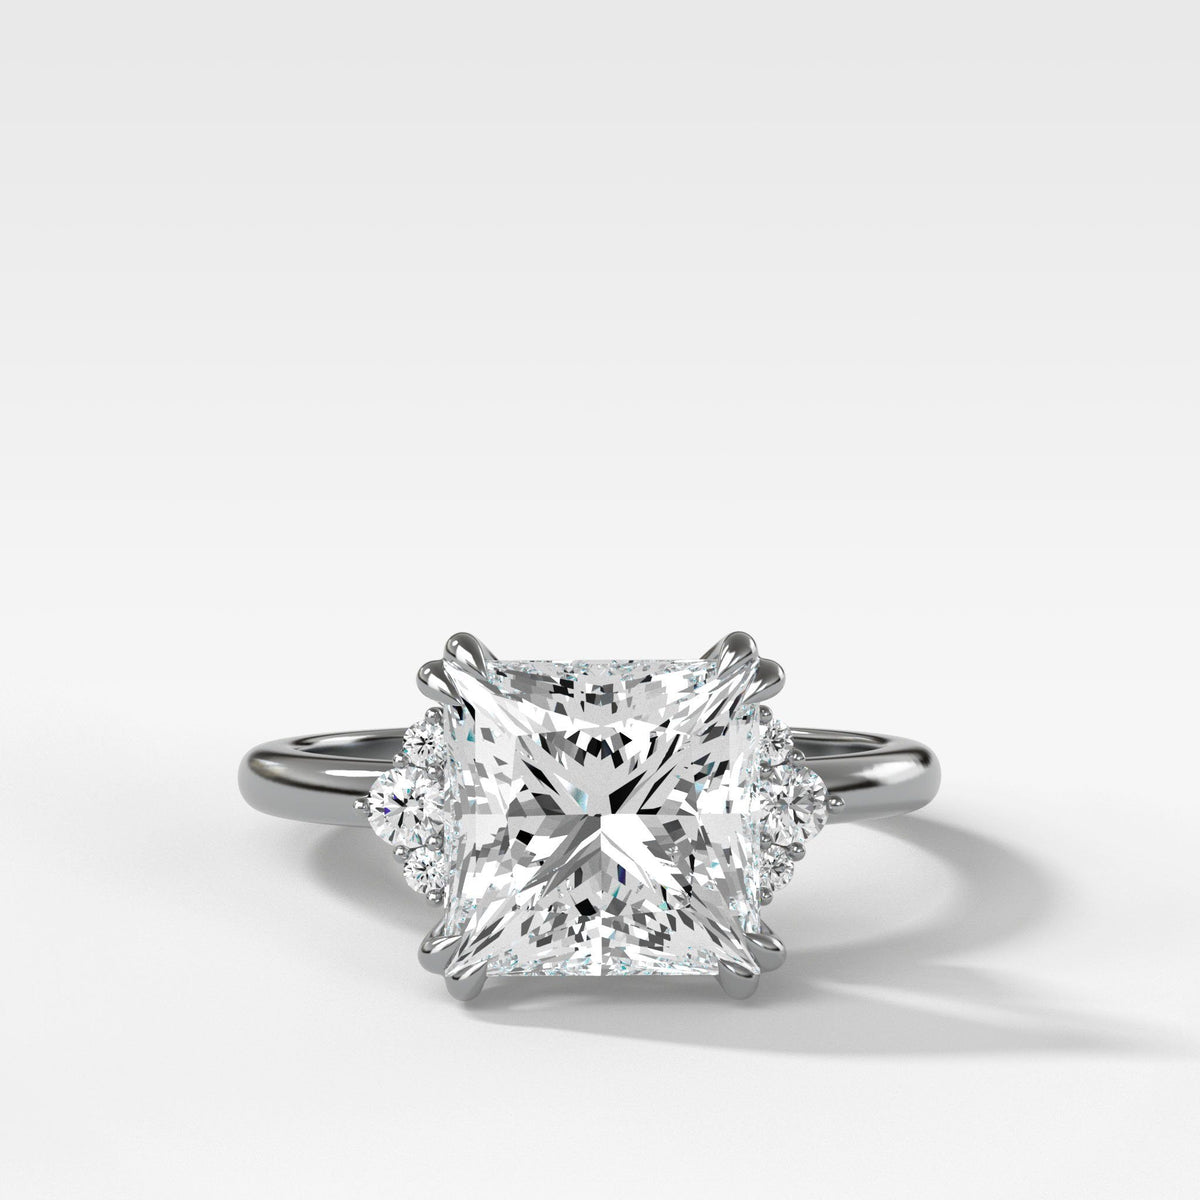 Signature Cluster Engagement Ring With Princess Cut by Good Stone in White Gold